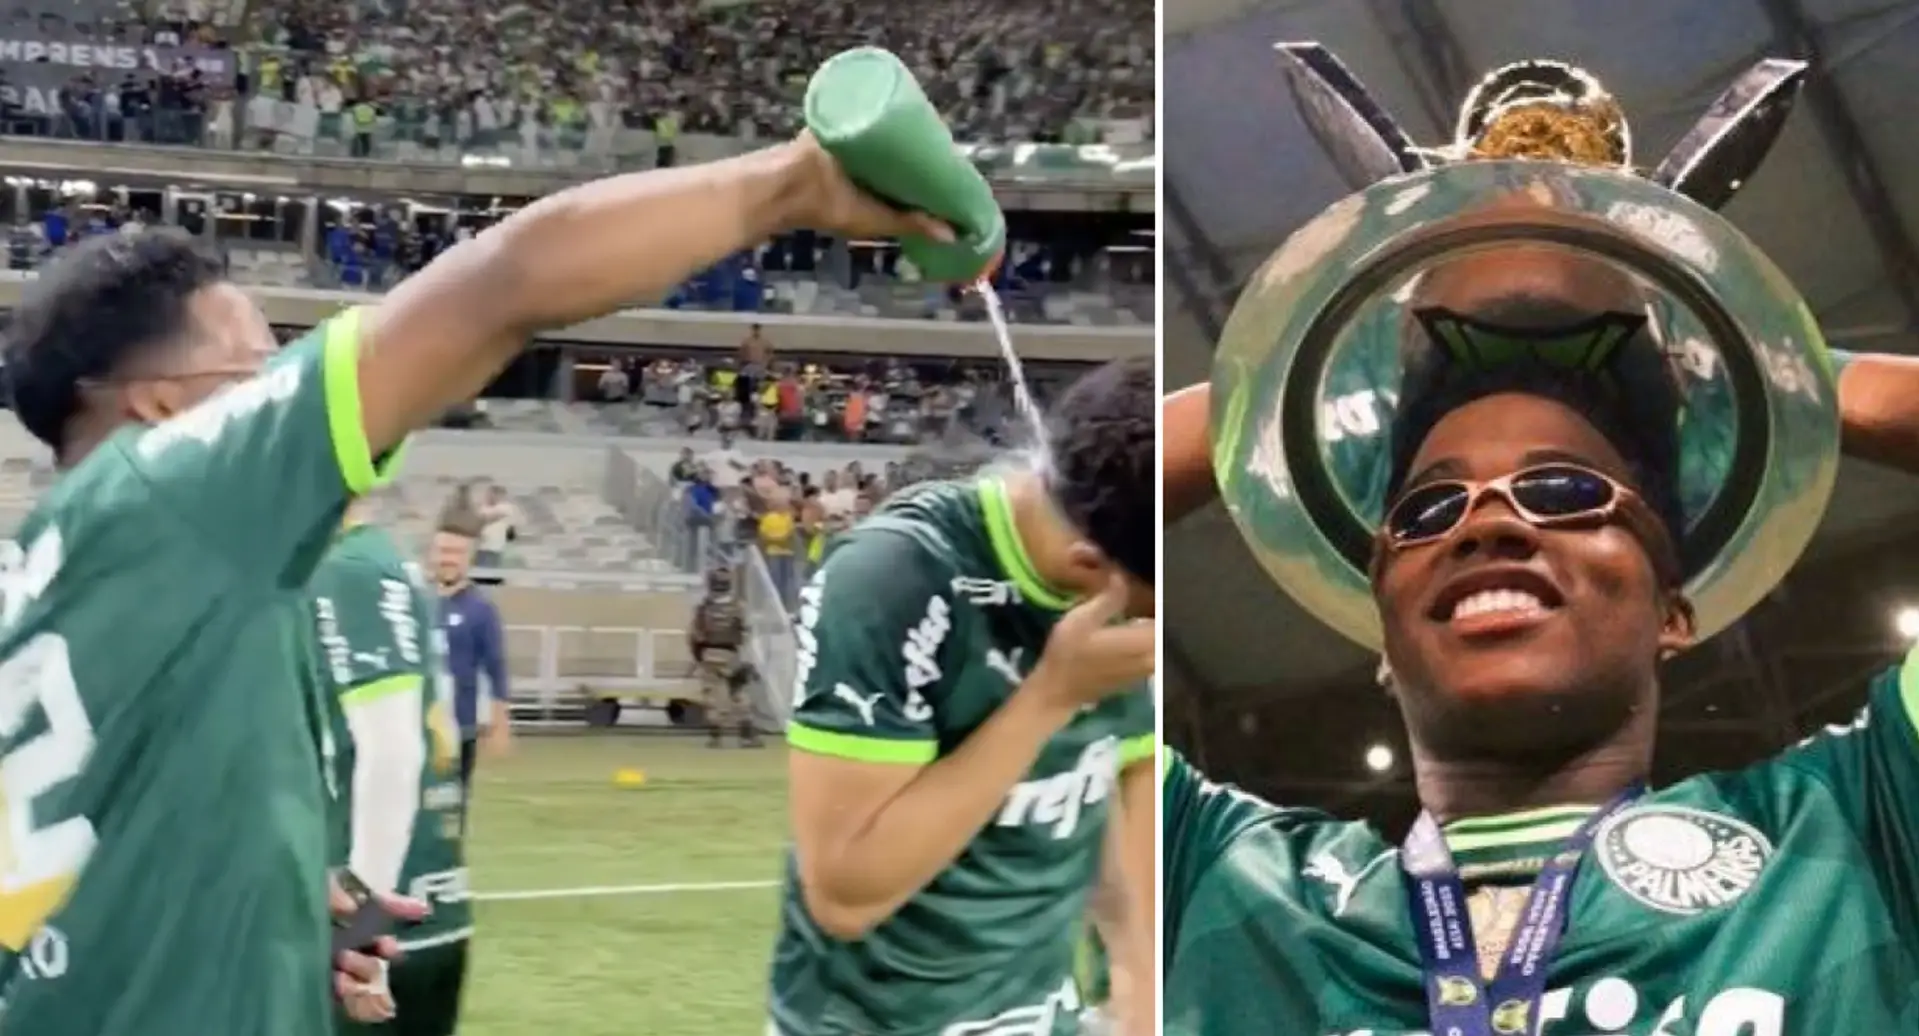 5 best pics and vids as Endrick celebrates Palmeiras league title in full swing